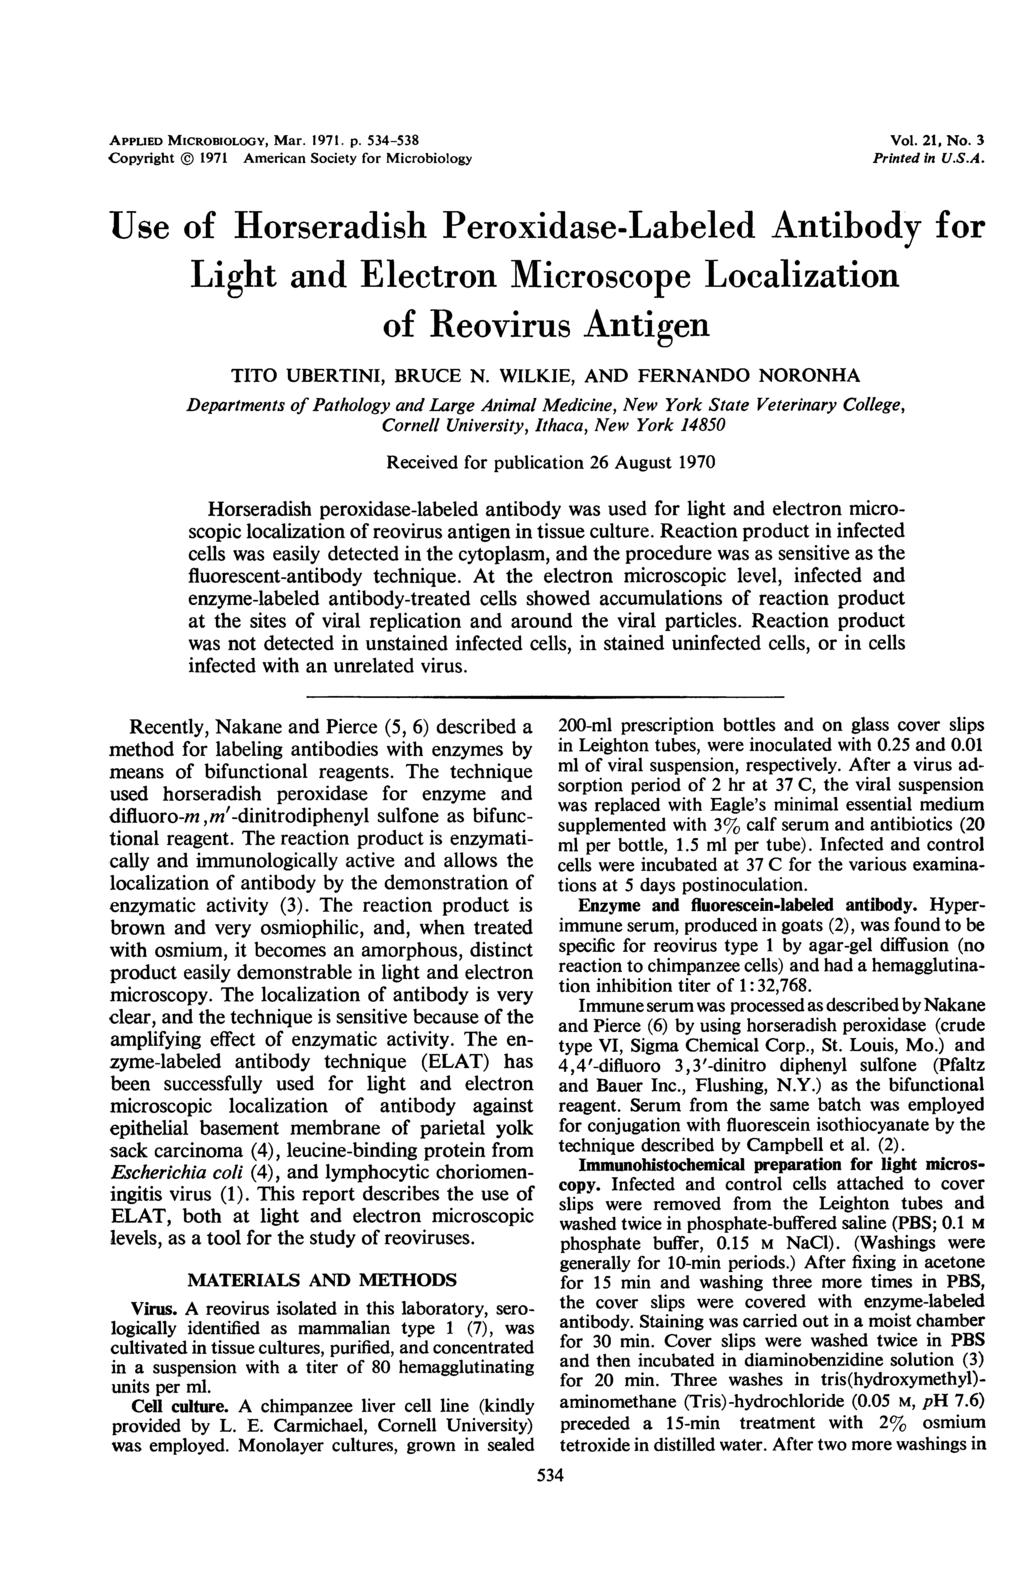 APPLIED MICROBIOLOGY, Mar. 1971. p. 534-538 Copyright @ 1971 American Society for Microbiology Vol. 21, No. 3 Printed in U.S.A. Use of Horseradish Peroxidase-Labeled Antibody for Light and Electron Microscope Localization of Reovirus Antigen TITO UBERTINI, BRUCE N.